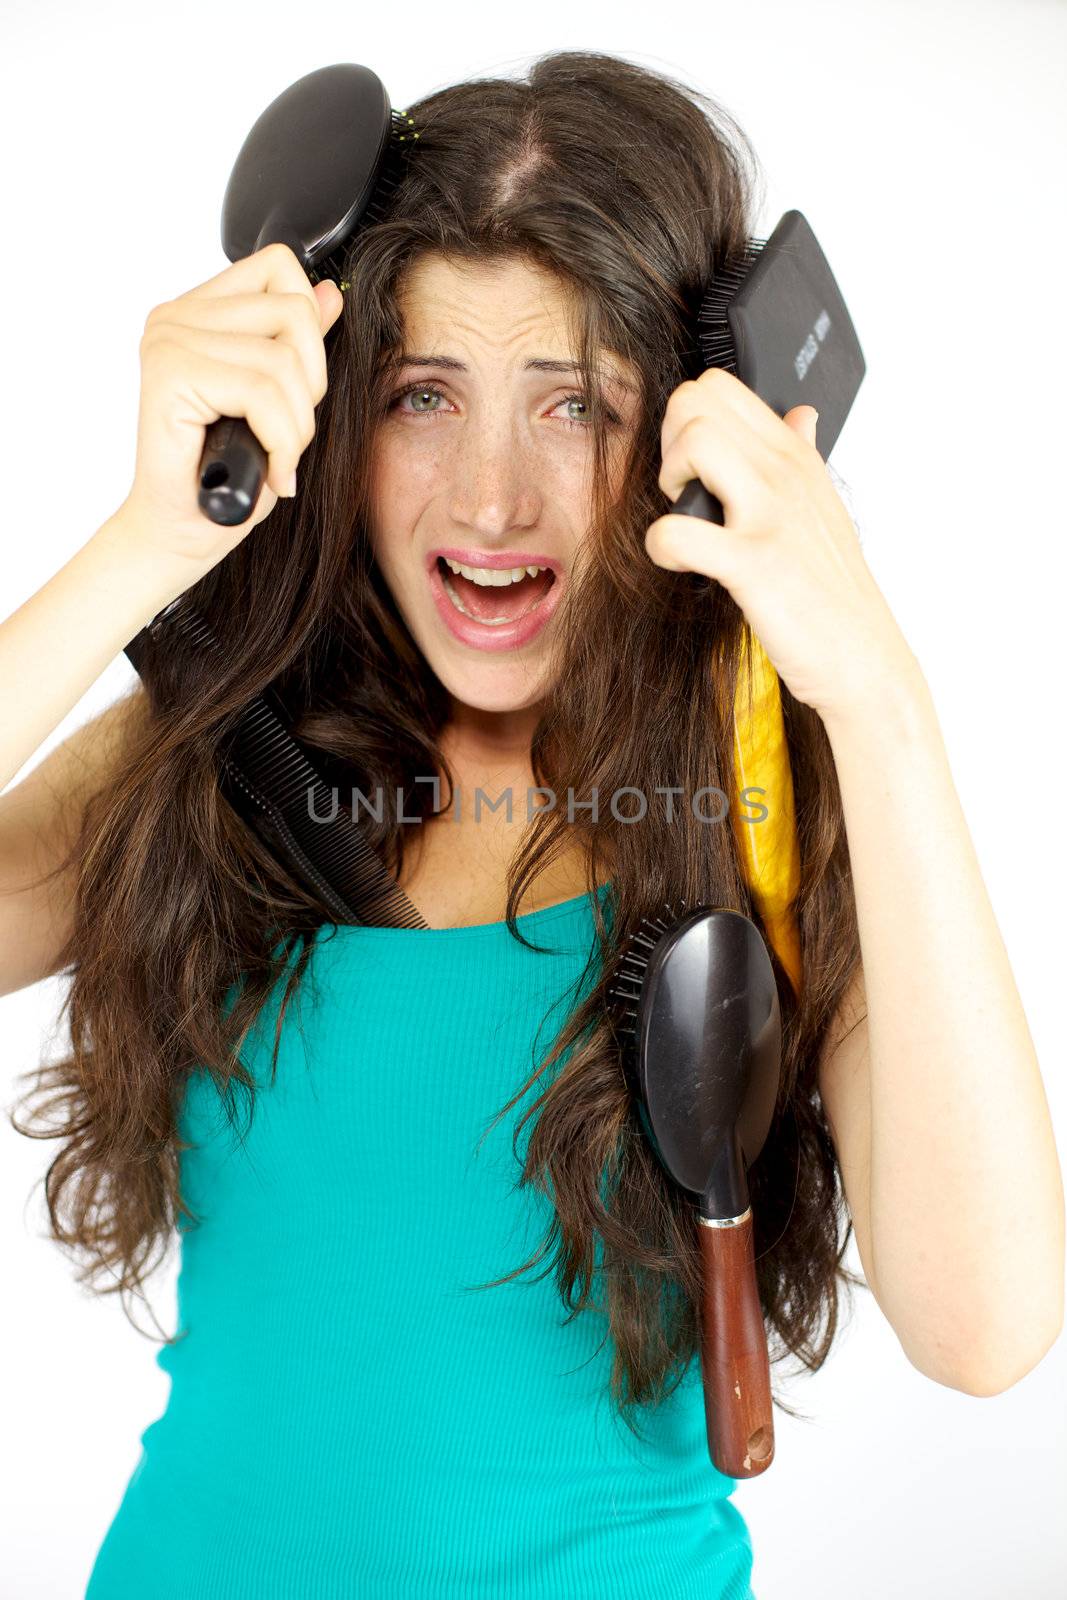 Woman shouting for help hair problem by fmarsicano